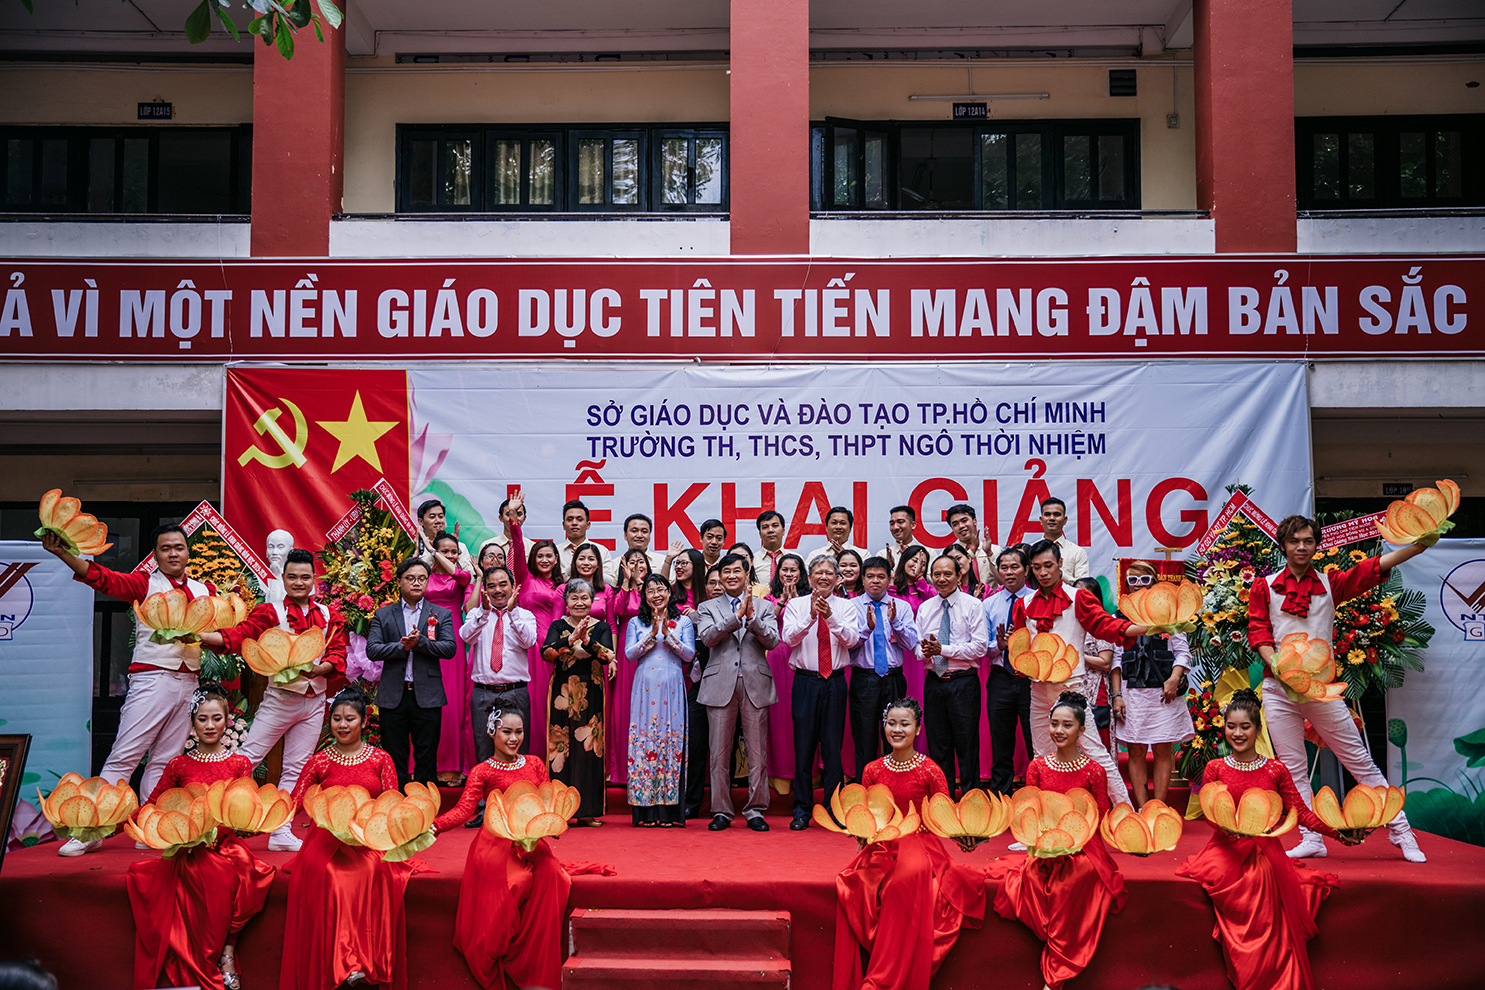 IPPG Chairman and Vu A Dinh Scholarship Fund prepped for a new school year